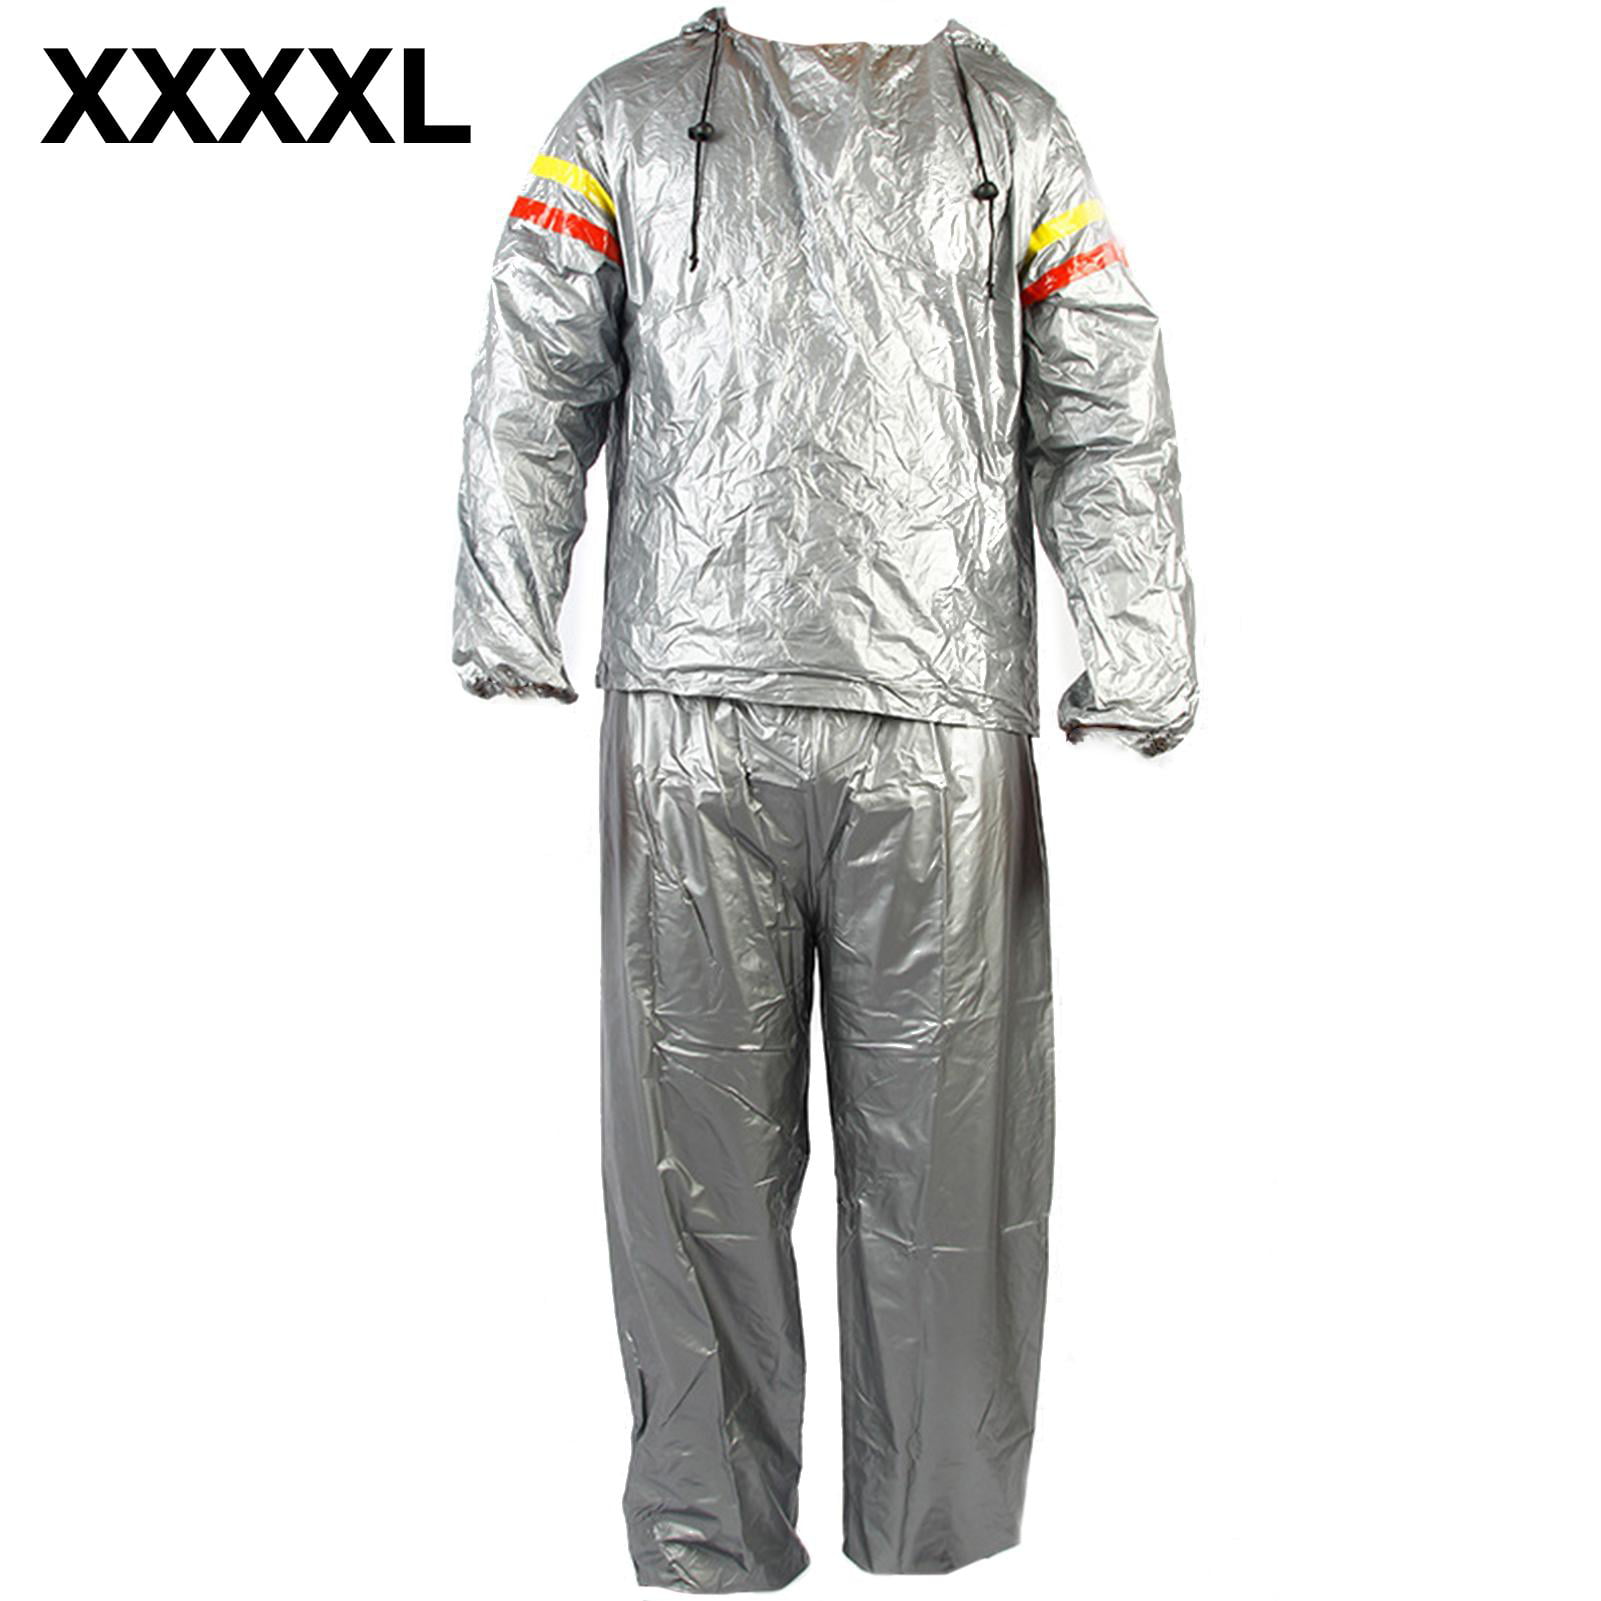 anyilon Waterproof Windproof PVC Sauna Suit Anti-Rip Training Fitness Weight Loss Sport Sauna Clothes Solid Color Gym Suit